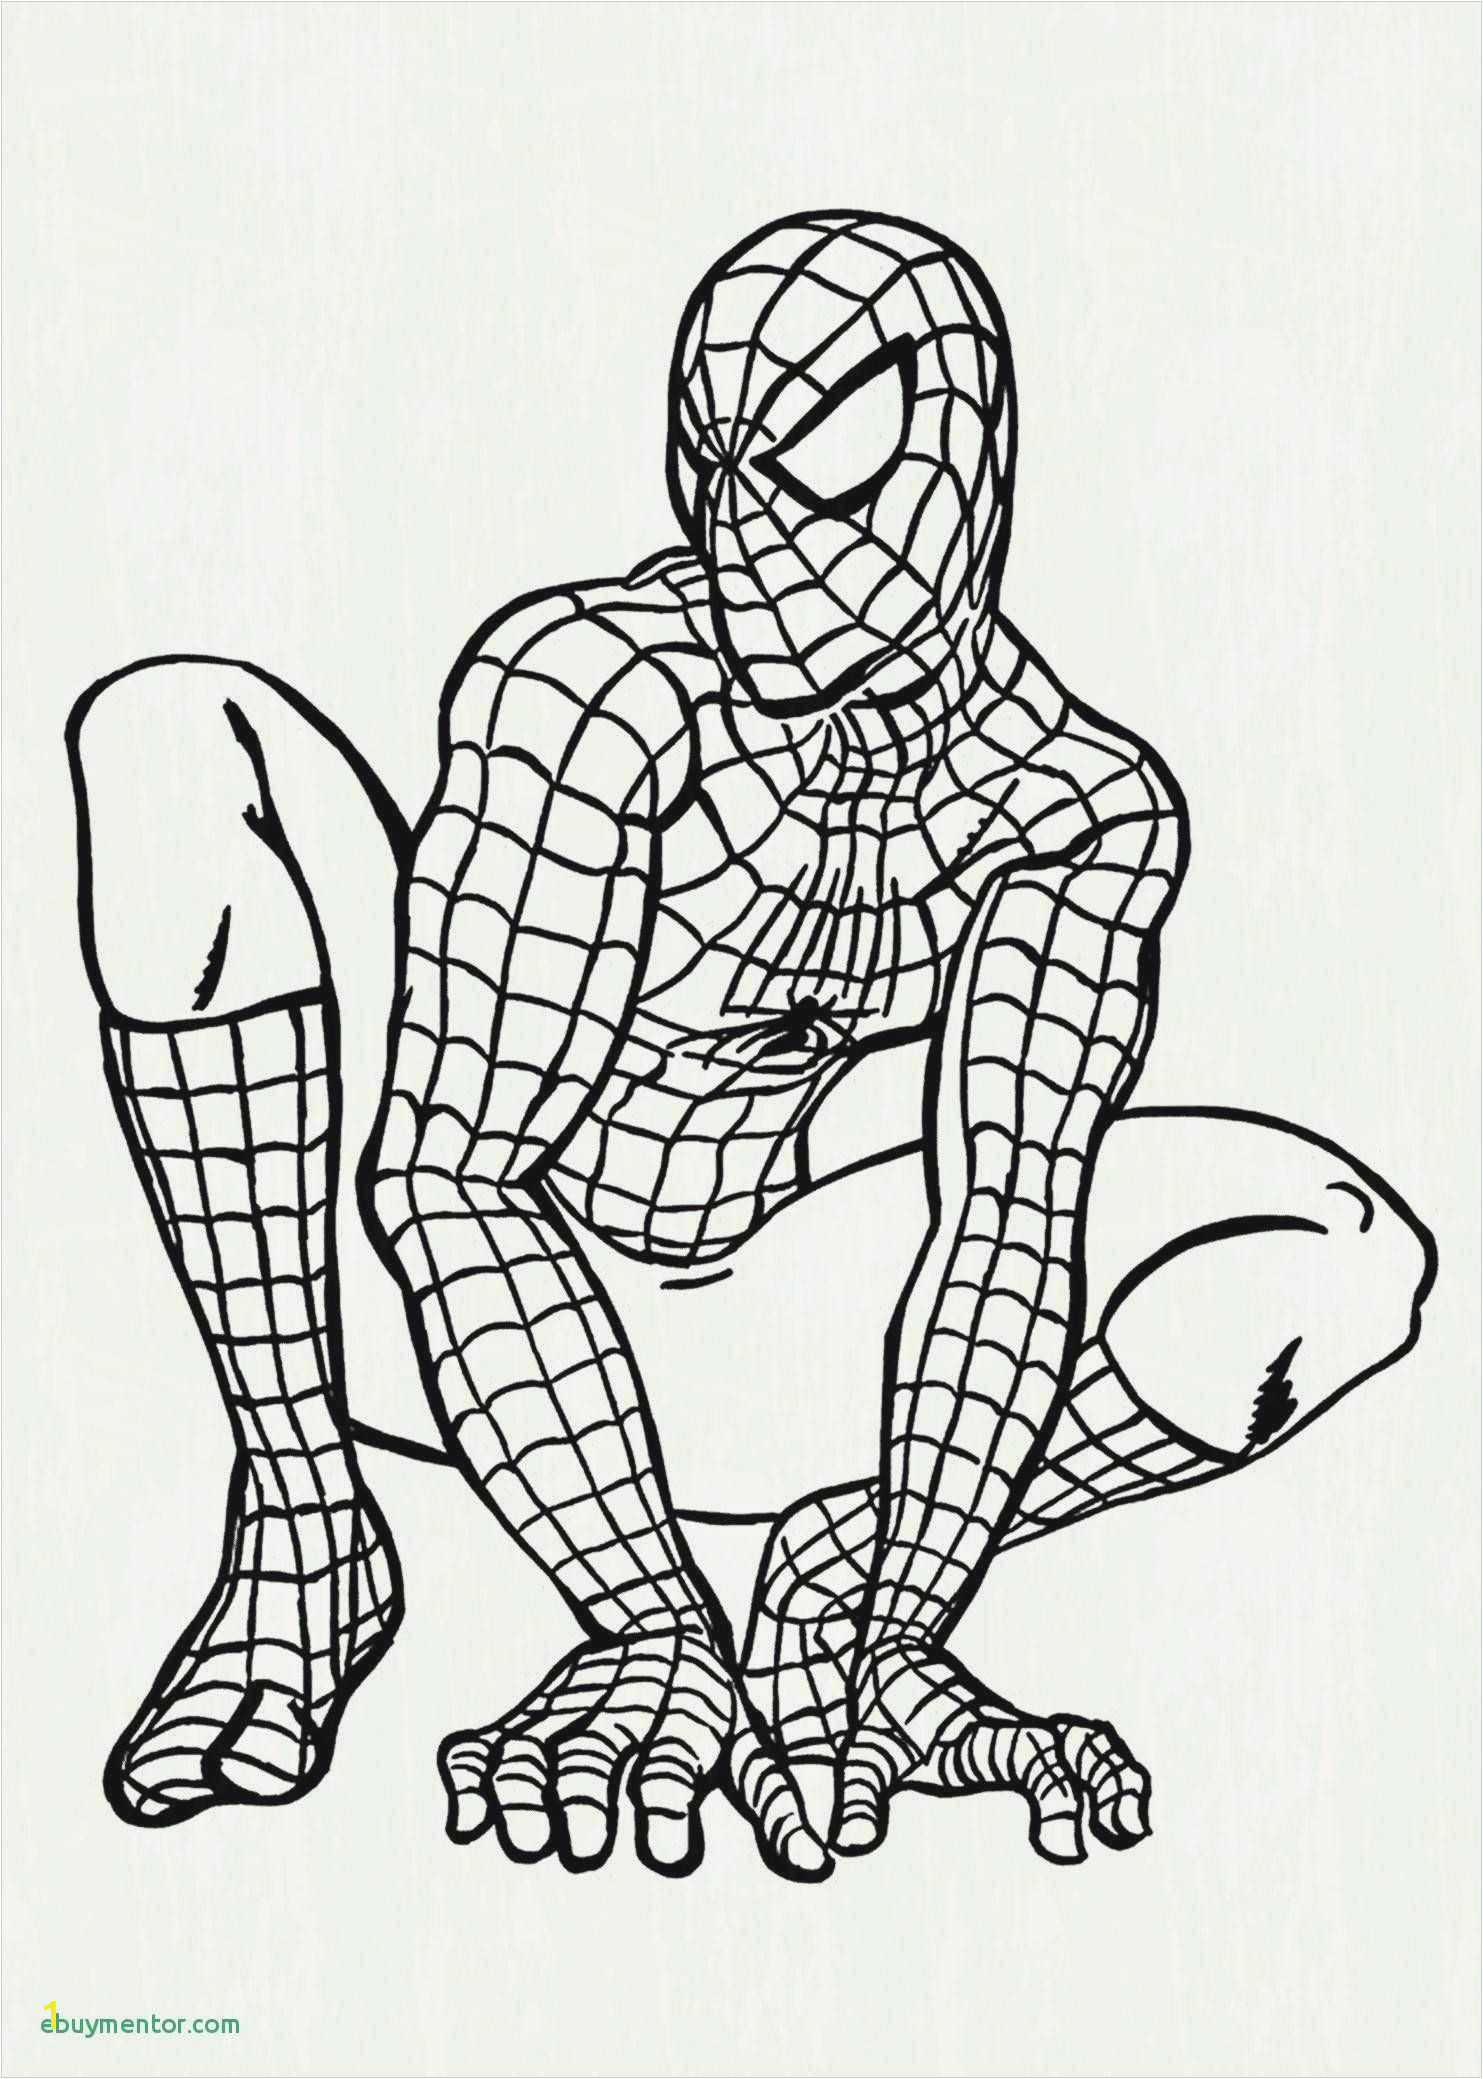 Spiderman Coloring and Activity Book 5 Free Coloring Games Printable In 2020 with Images